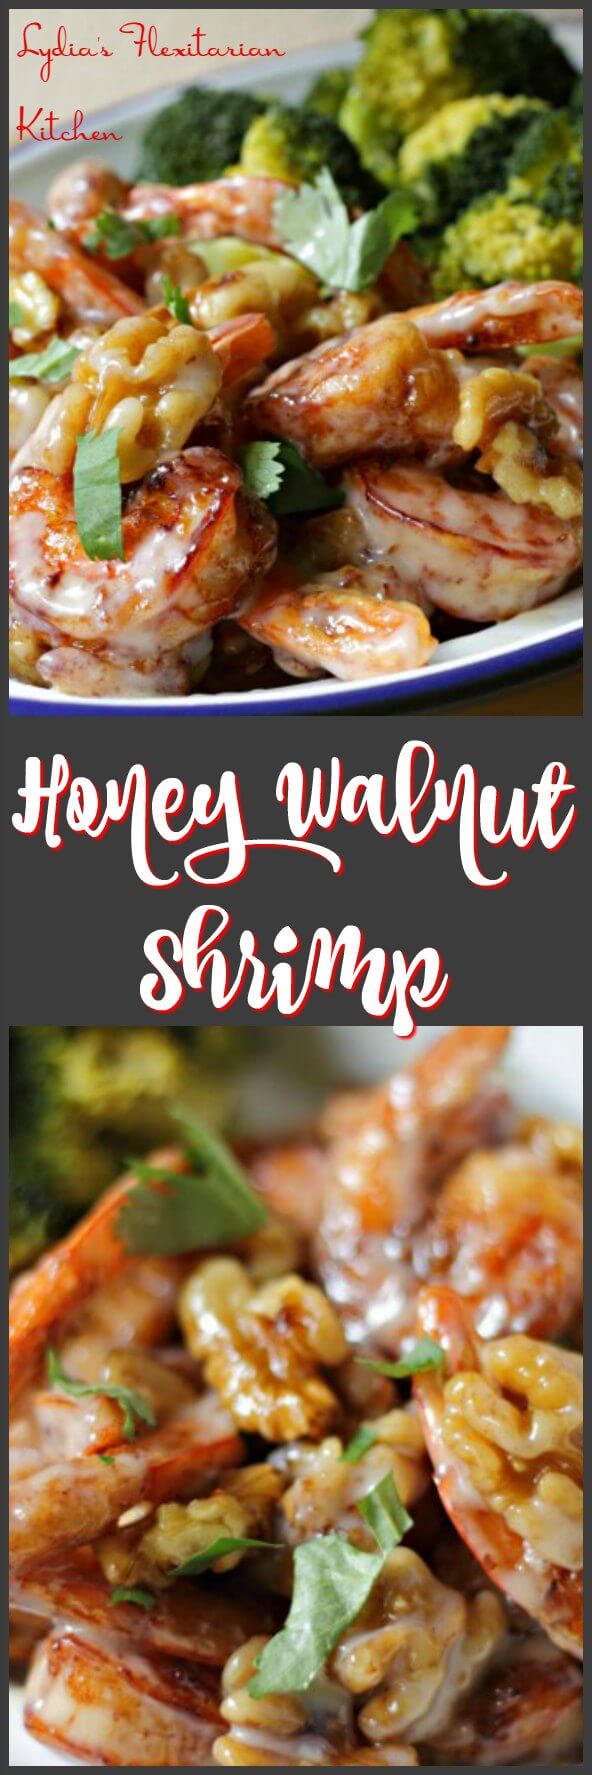 Honey Walnut Shrimp ~ Celebrate Chinese New Year by making this take out favorite at home! ~ Lydia's Flexitarian Kitchen